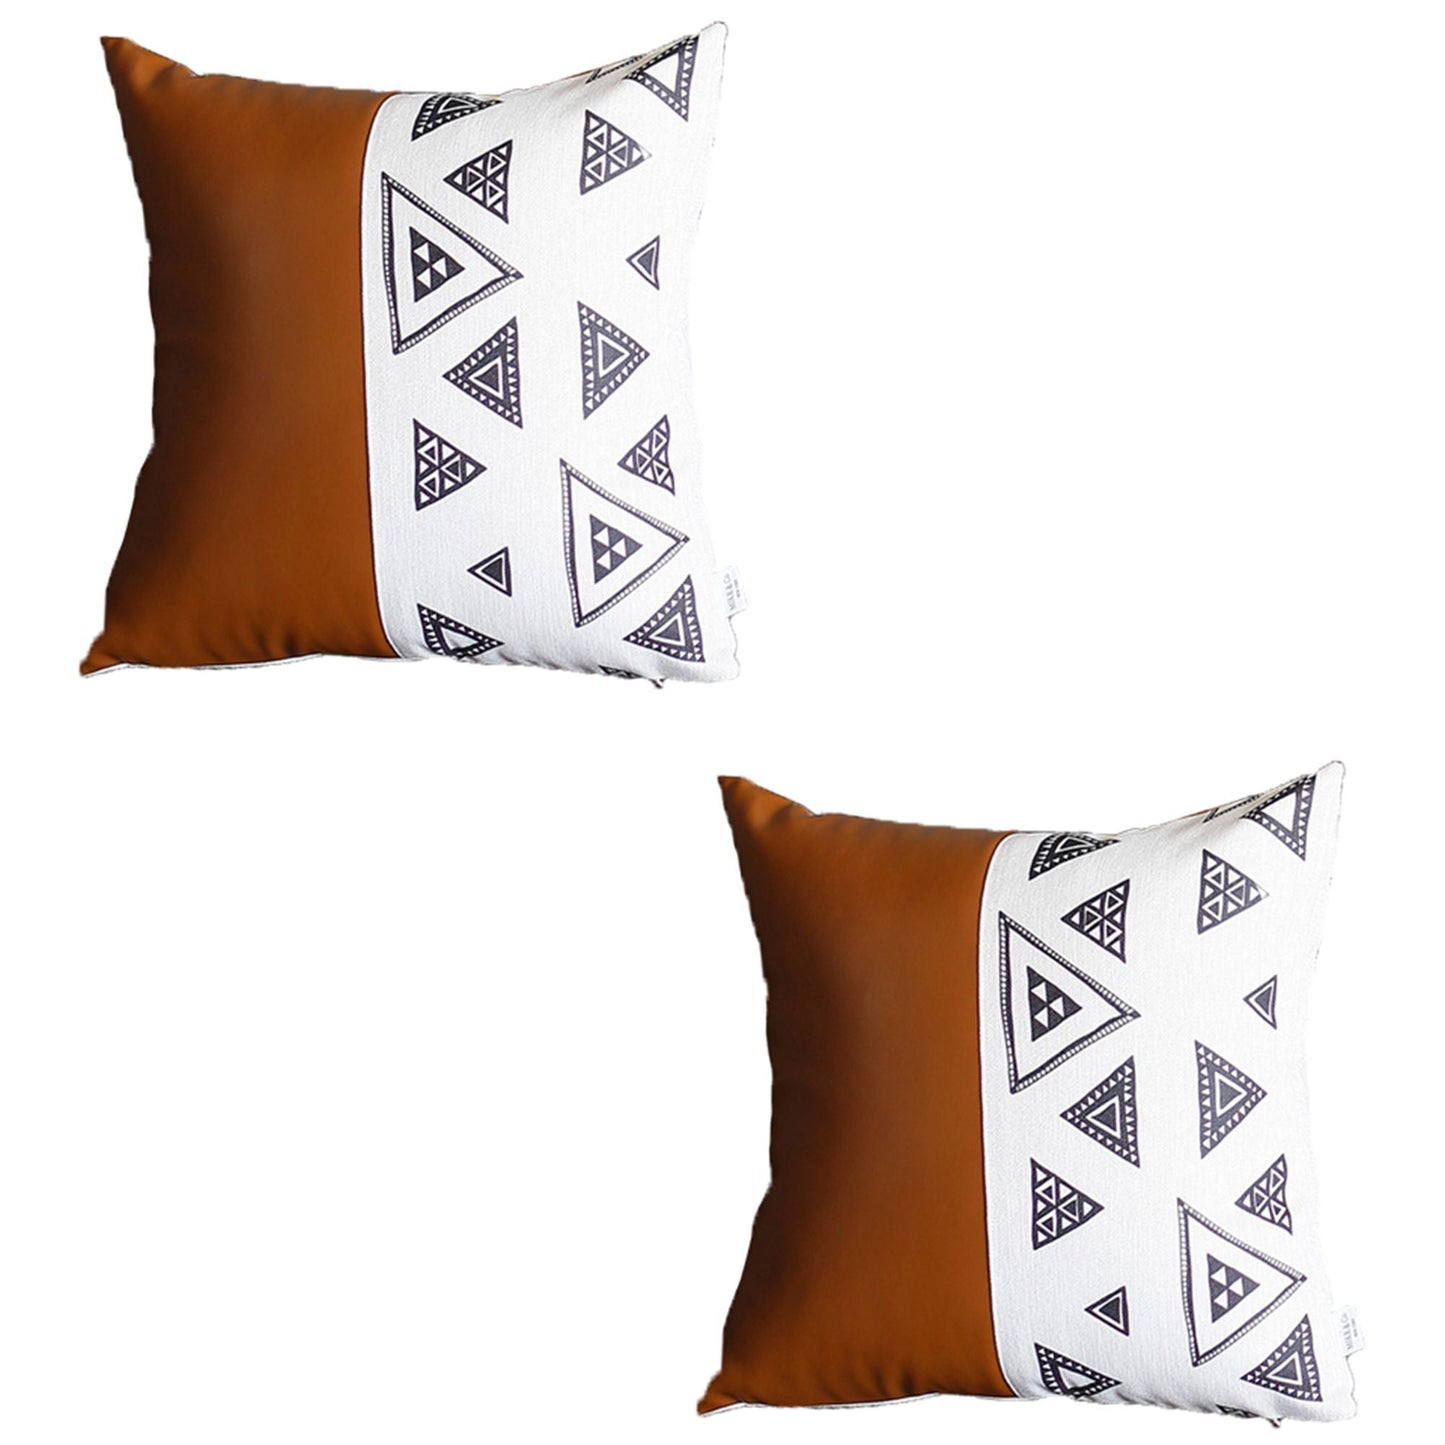 Set of 2 Vegan Faux Leather Handcrafted Decorative Throw Pillow Cover (Geometric Square)